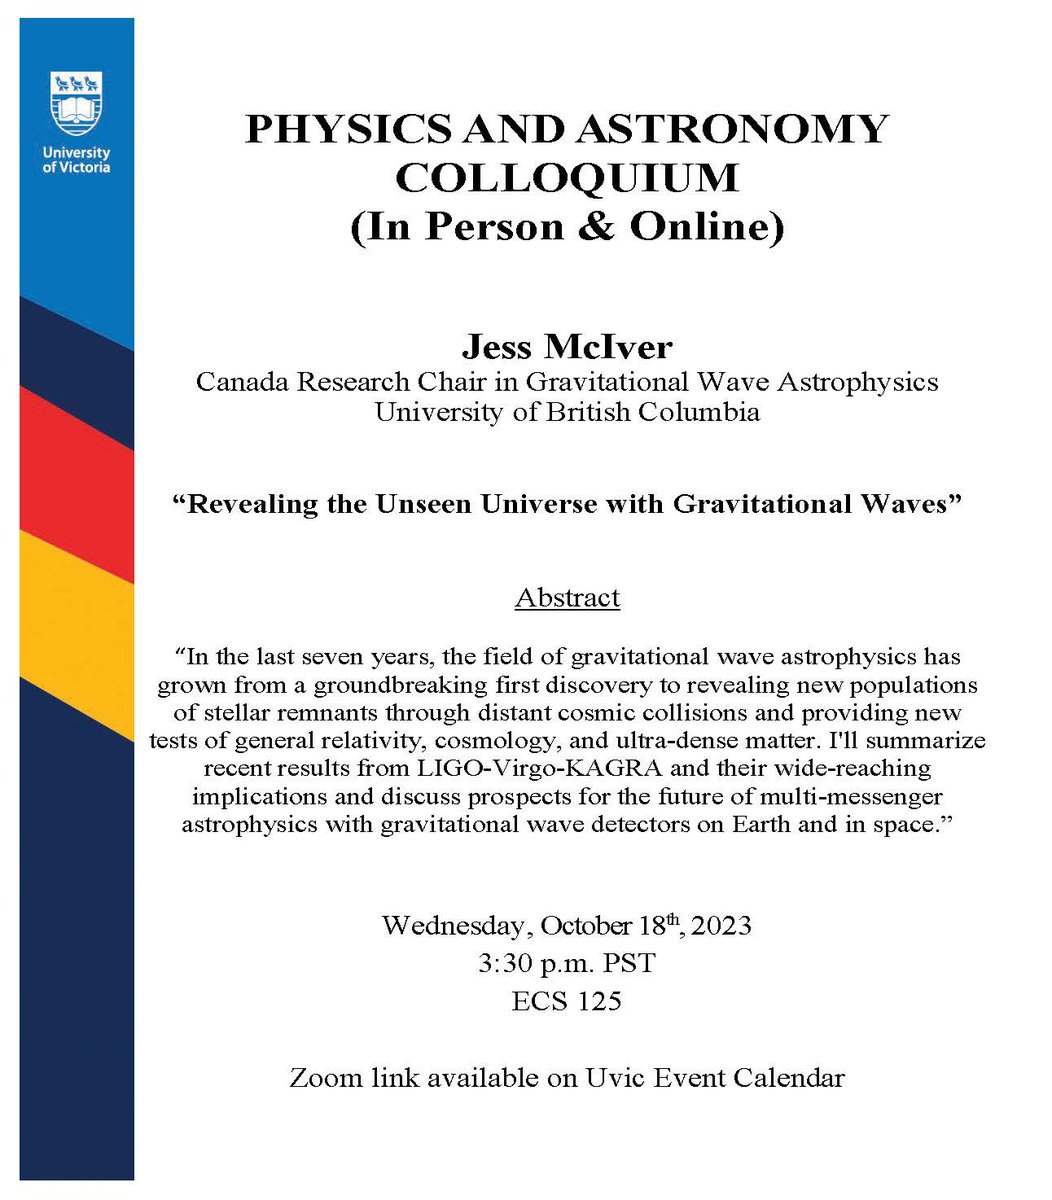 COLLOQUIUM (In Person): Dr. Jess McIver, UBC, will give an in-person colloquium on Wednesday October 18th at 3:30pm PST. For more information: events.uvic.ca/physics/event/…